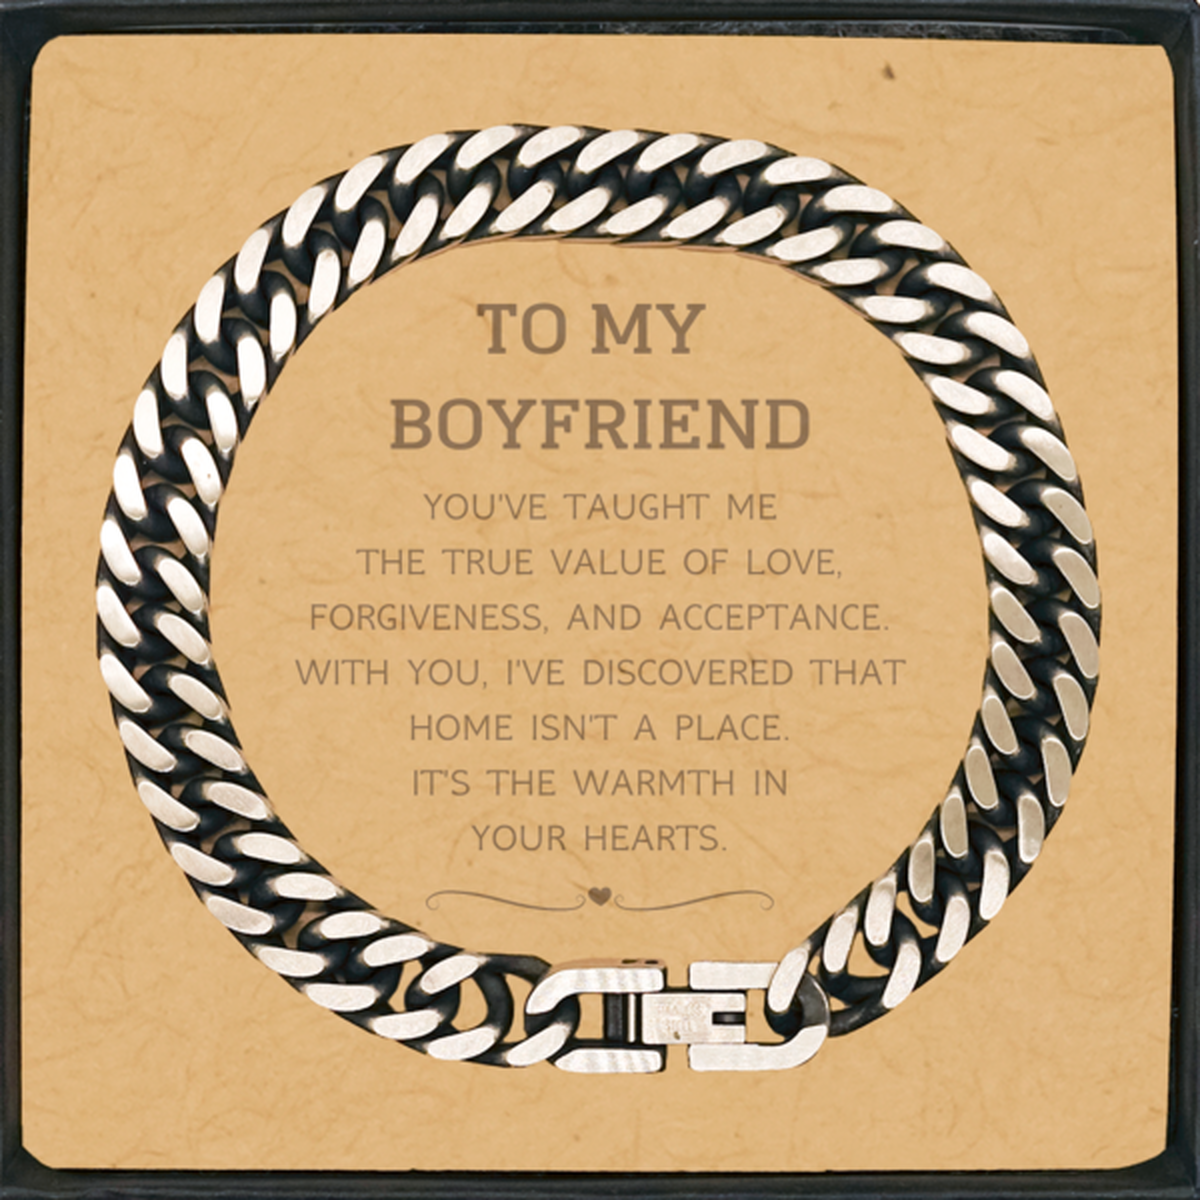 To My Boyfriend Gifts, You've taught me the true value of love, Thank You Gifts For Boyfriend, Birthday Cuban Link Chain Bracelet For Boyfriend